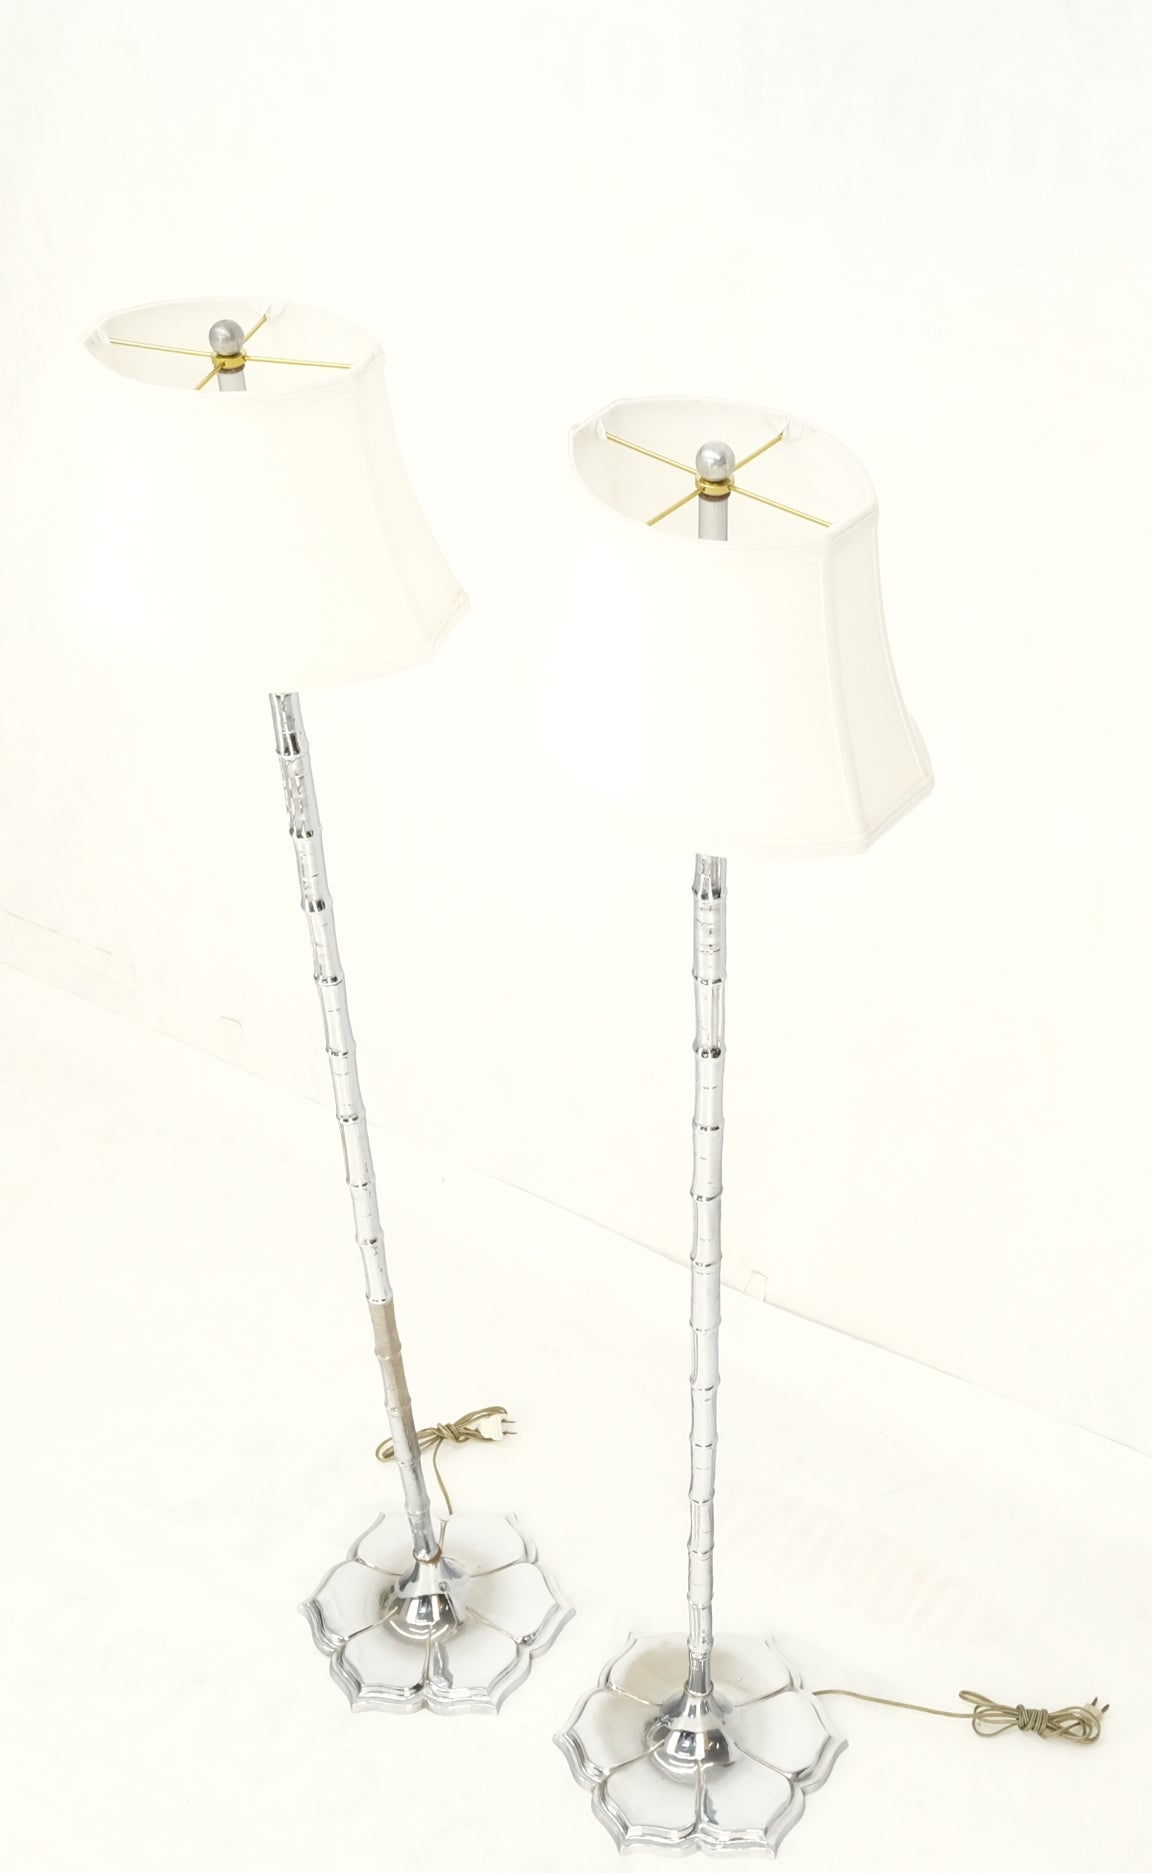 Pair of cast lotus shape bases chrome faux bamboo Mid-Century Modern floor lamps torcheres.